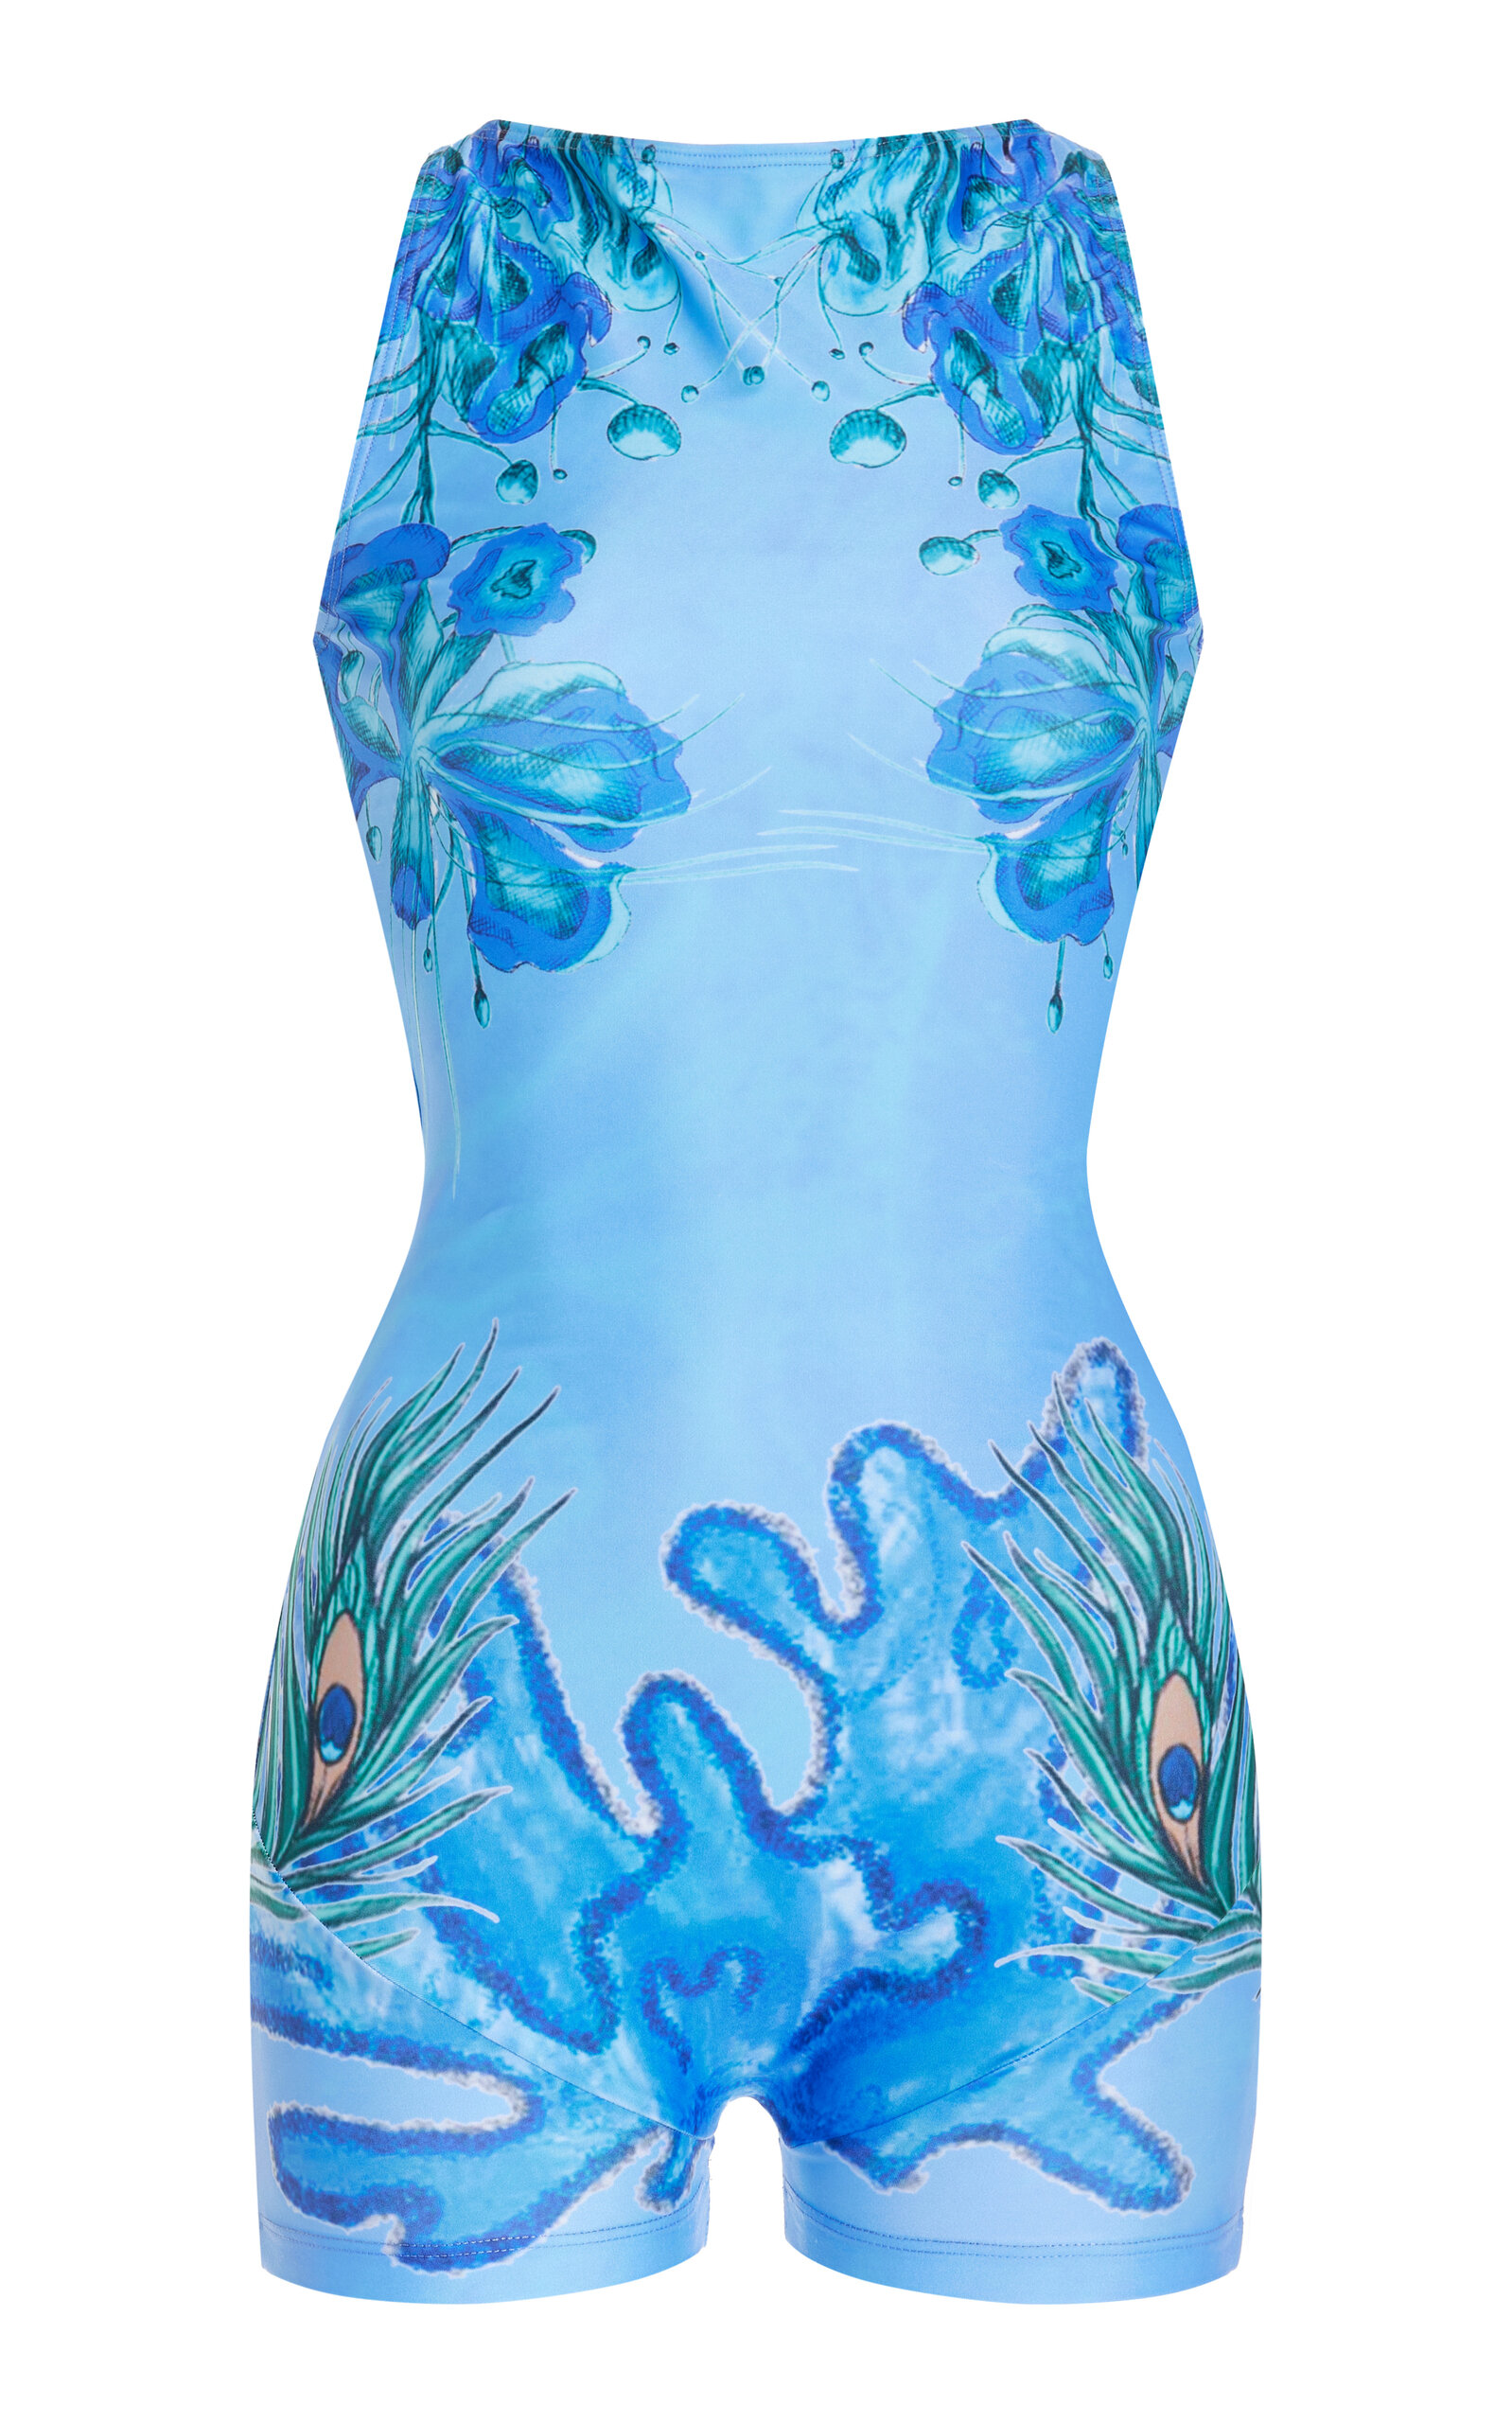 Exclusive One-Piece Swimsuit